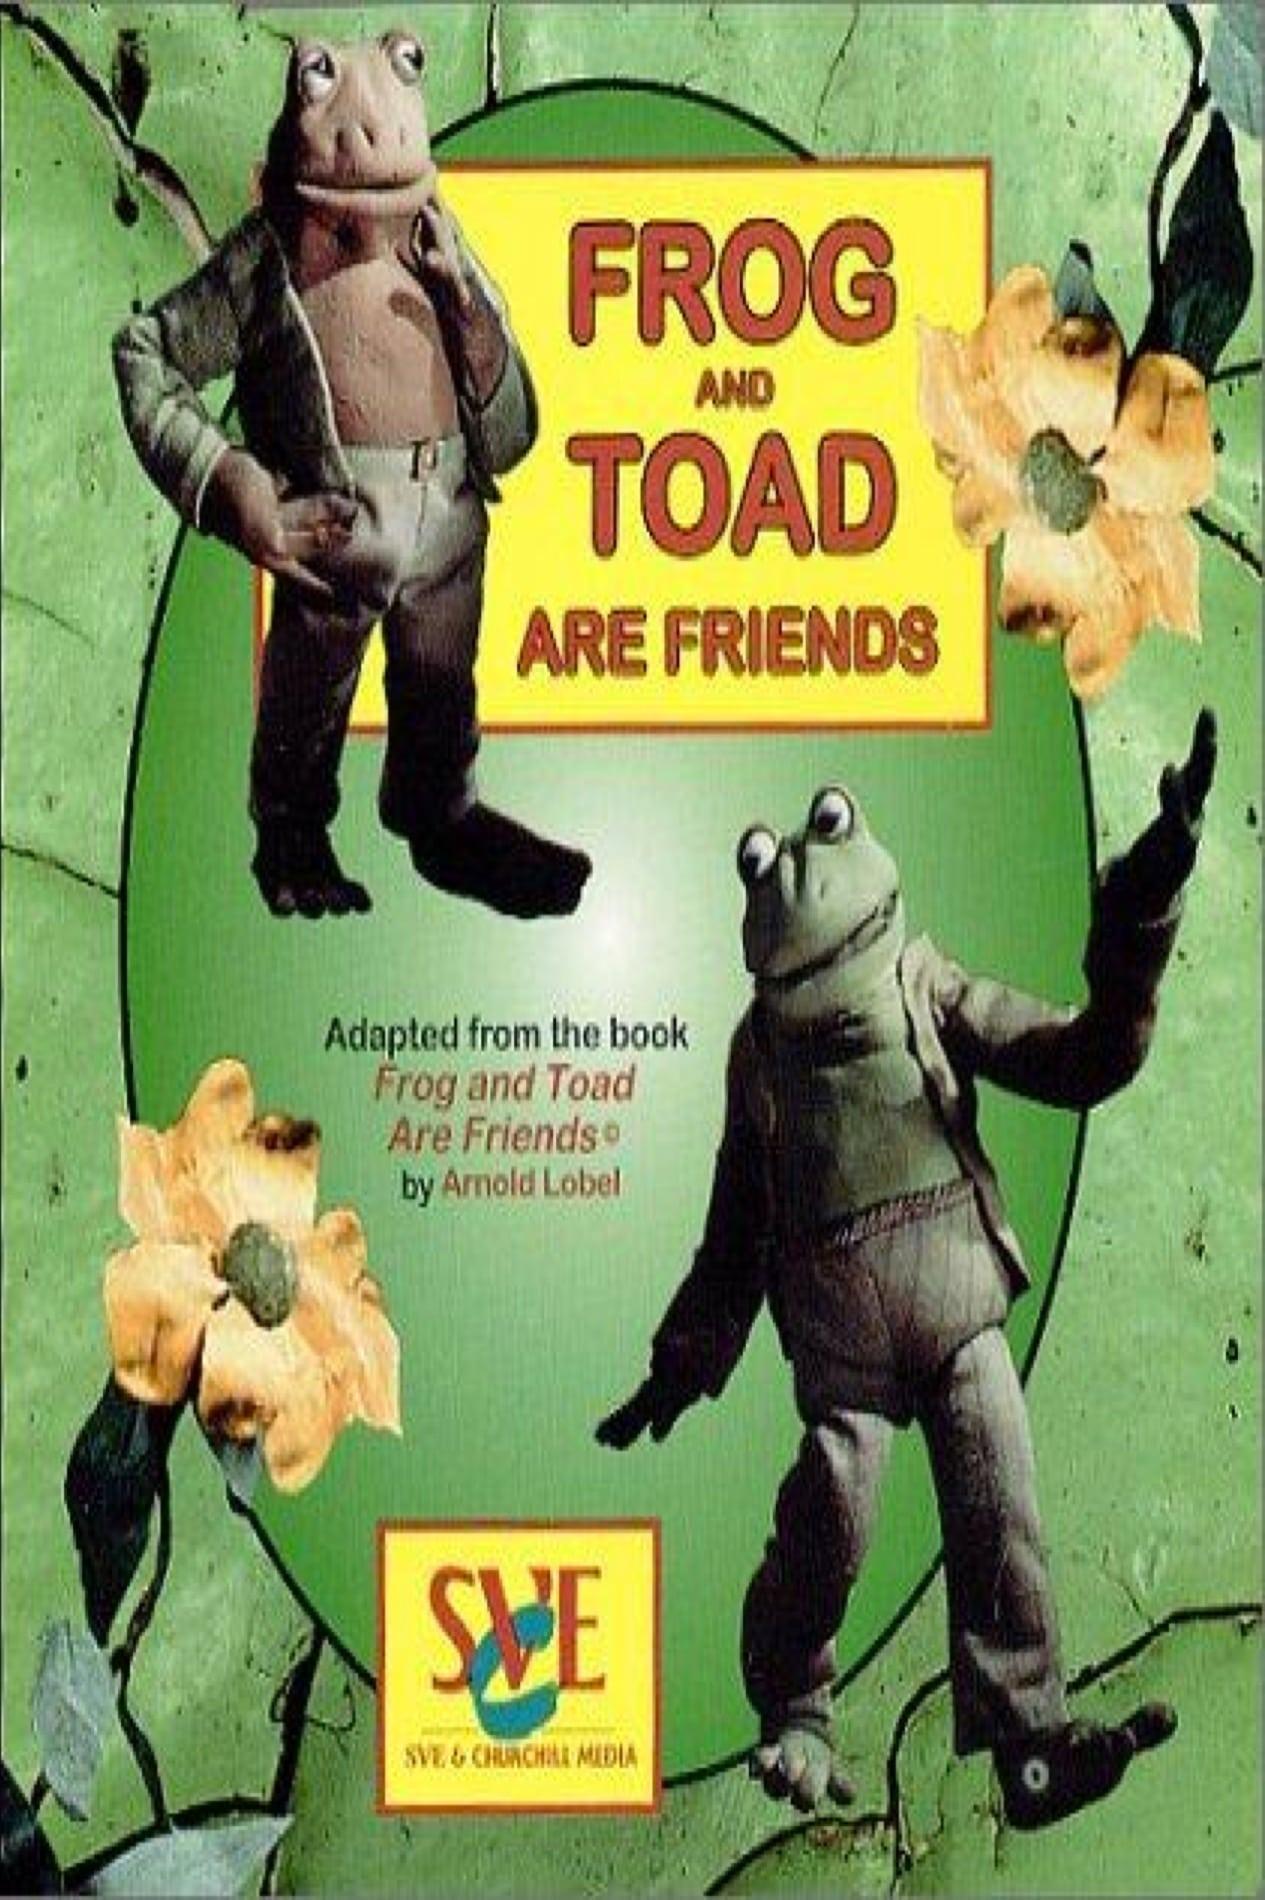 Frog and Toad Are Friends poster